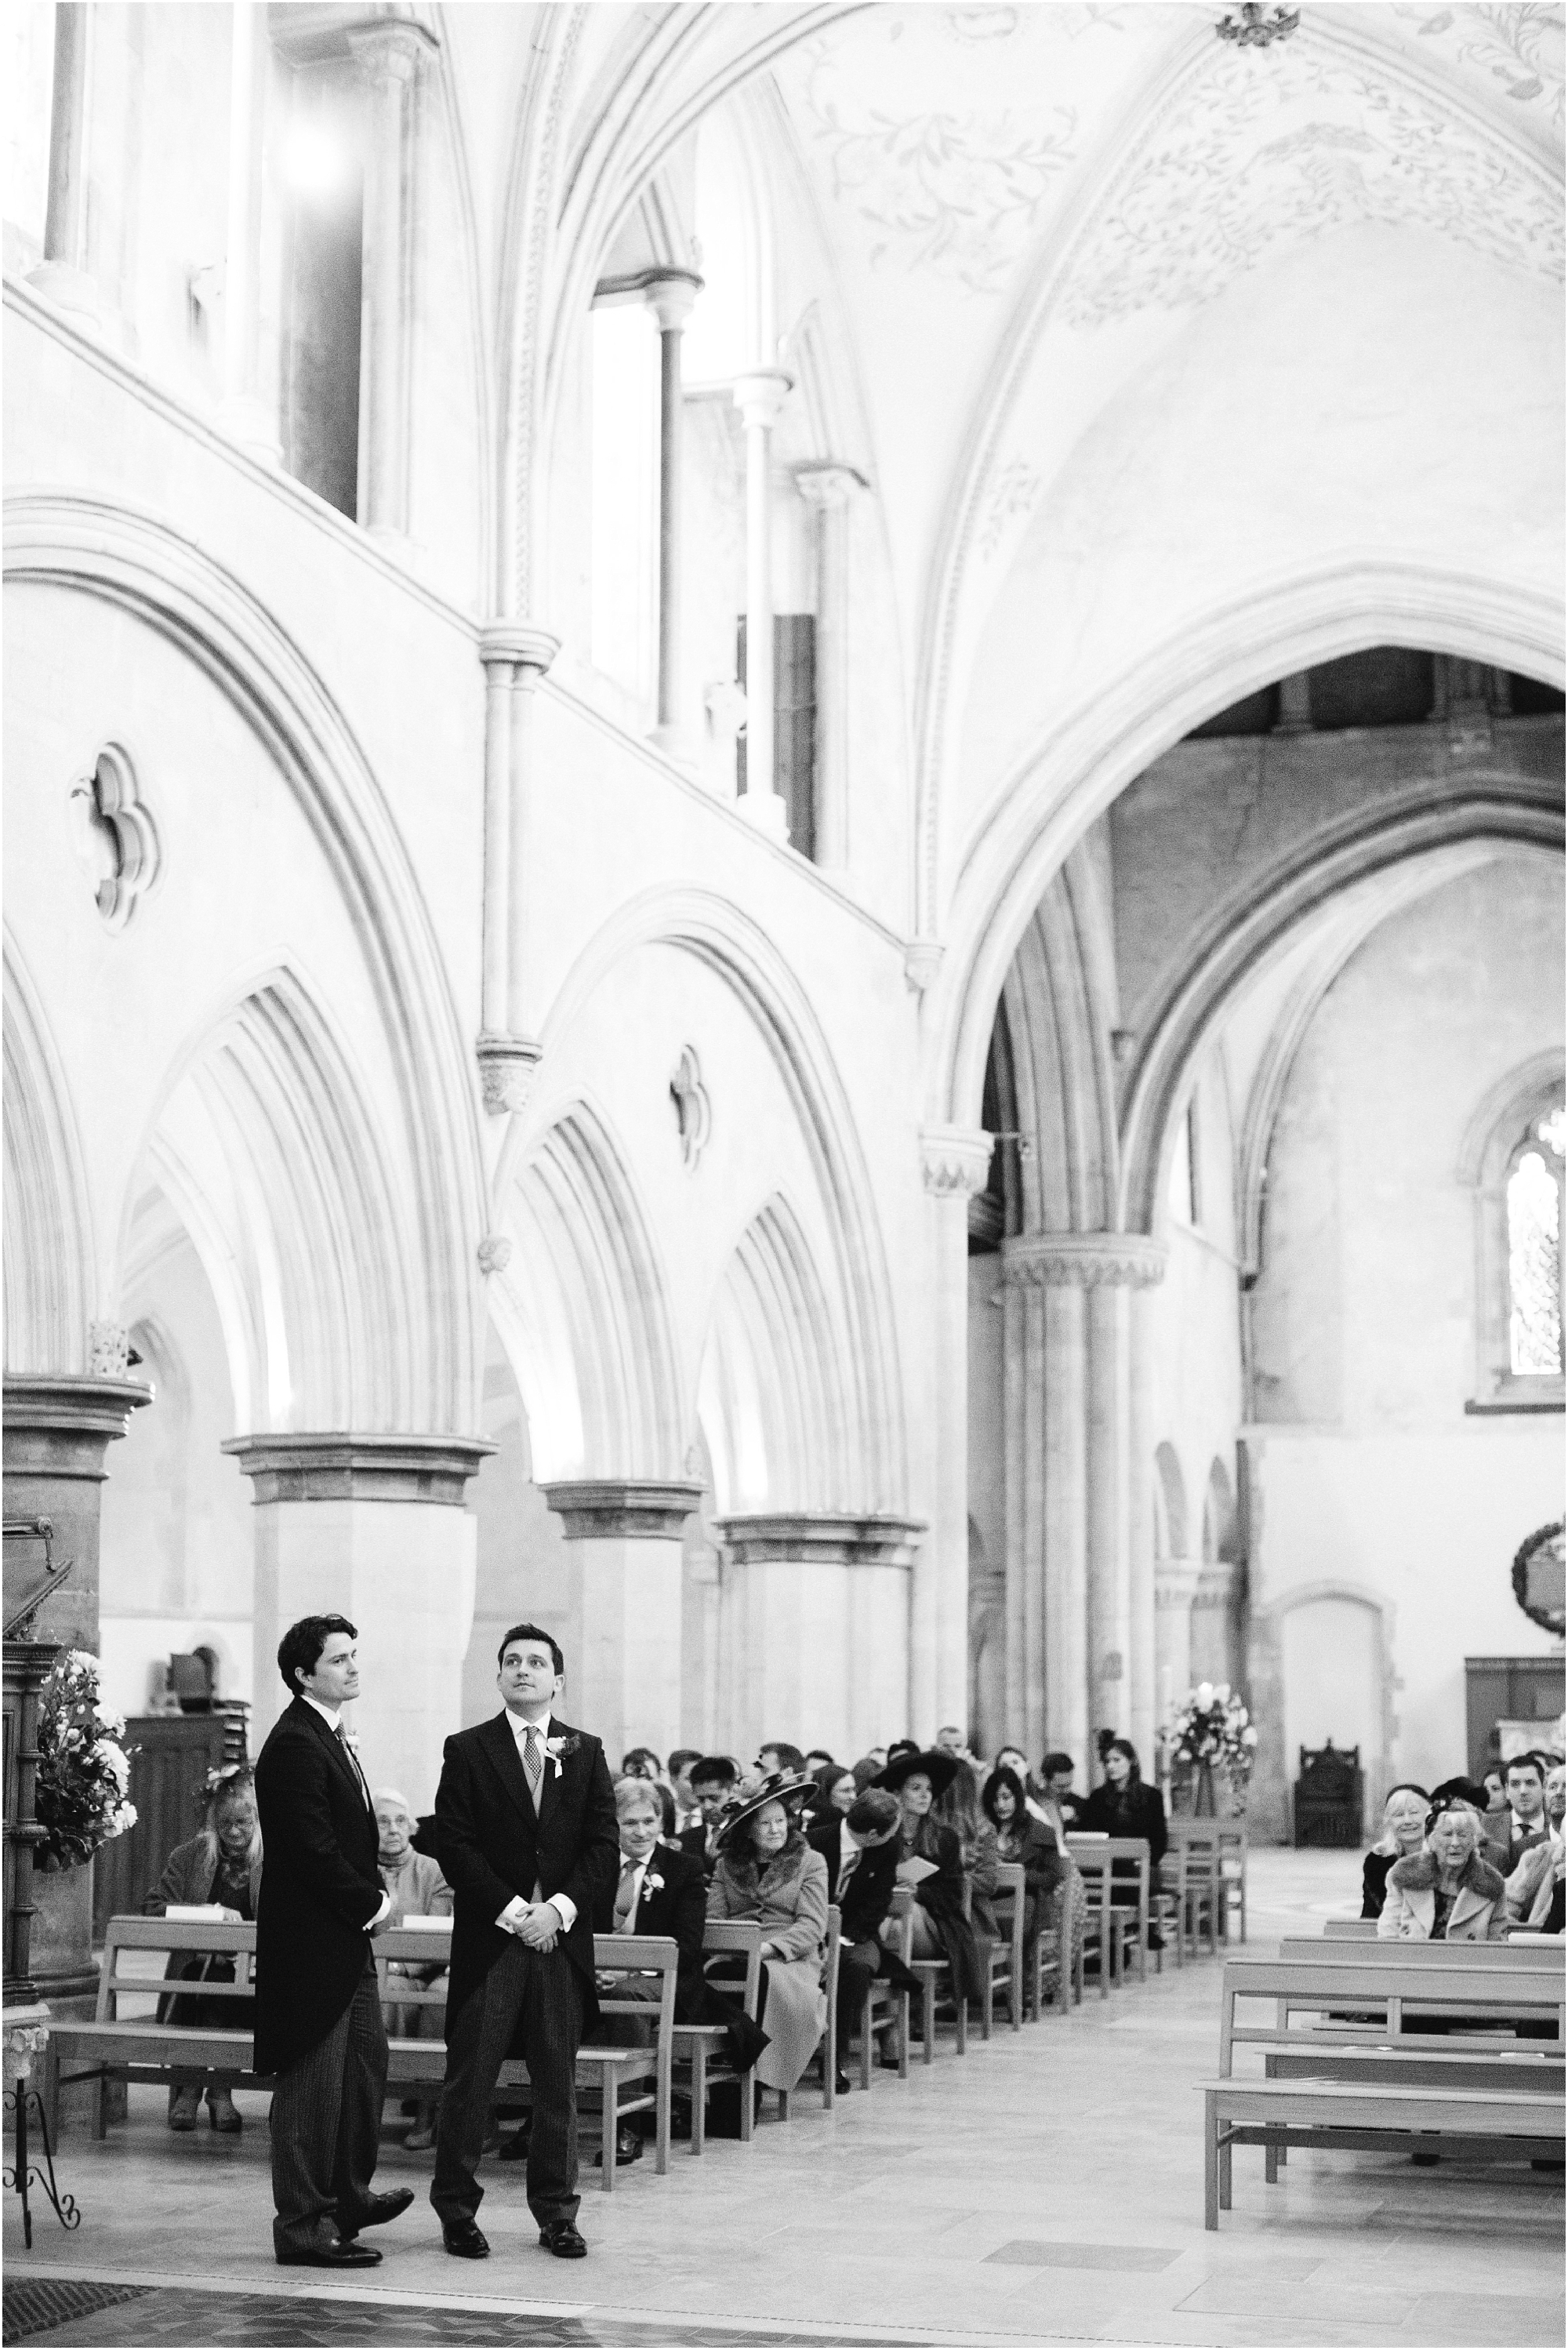 Groom and best man at front of church